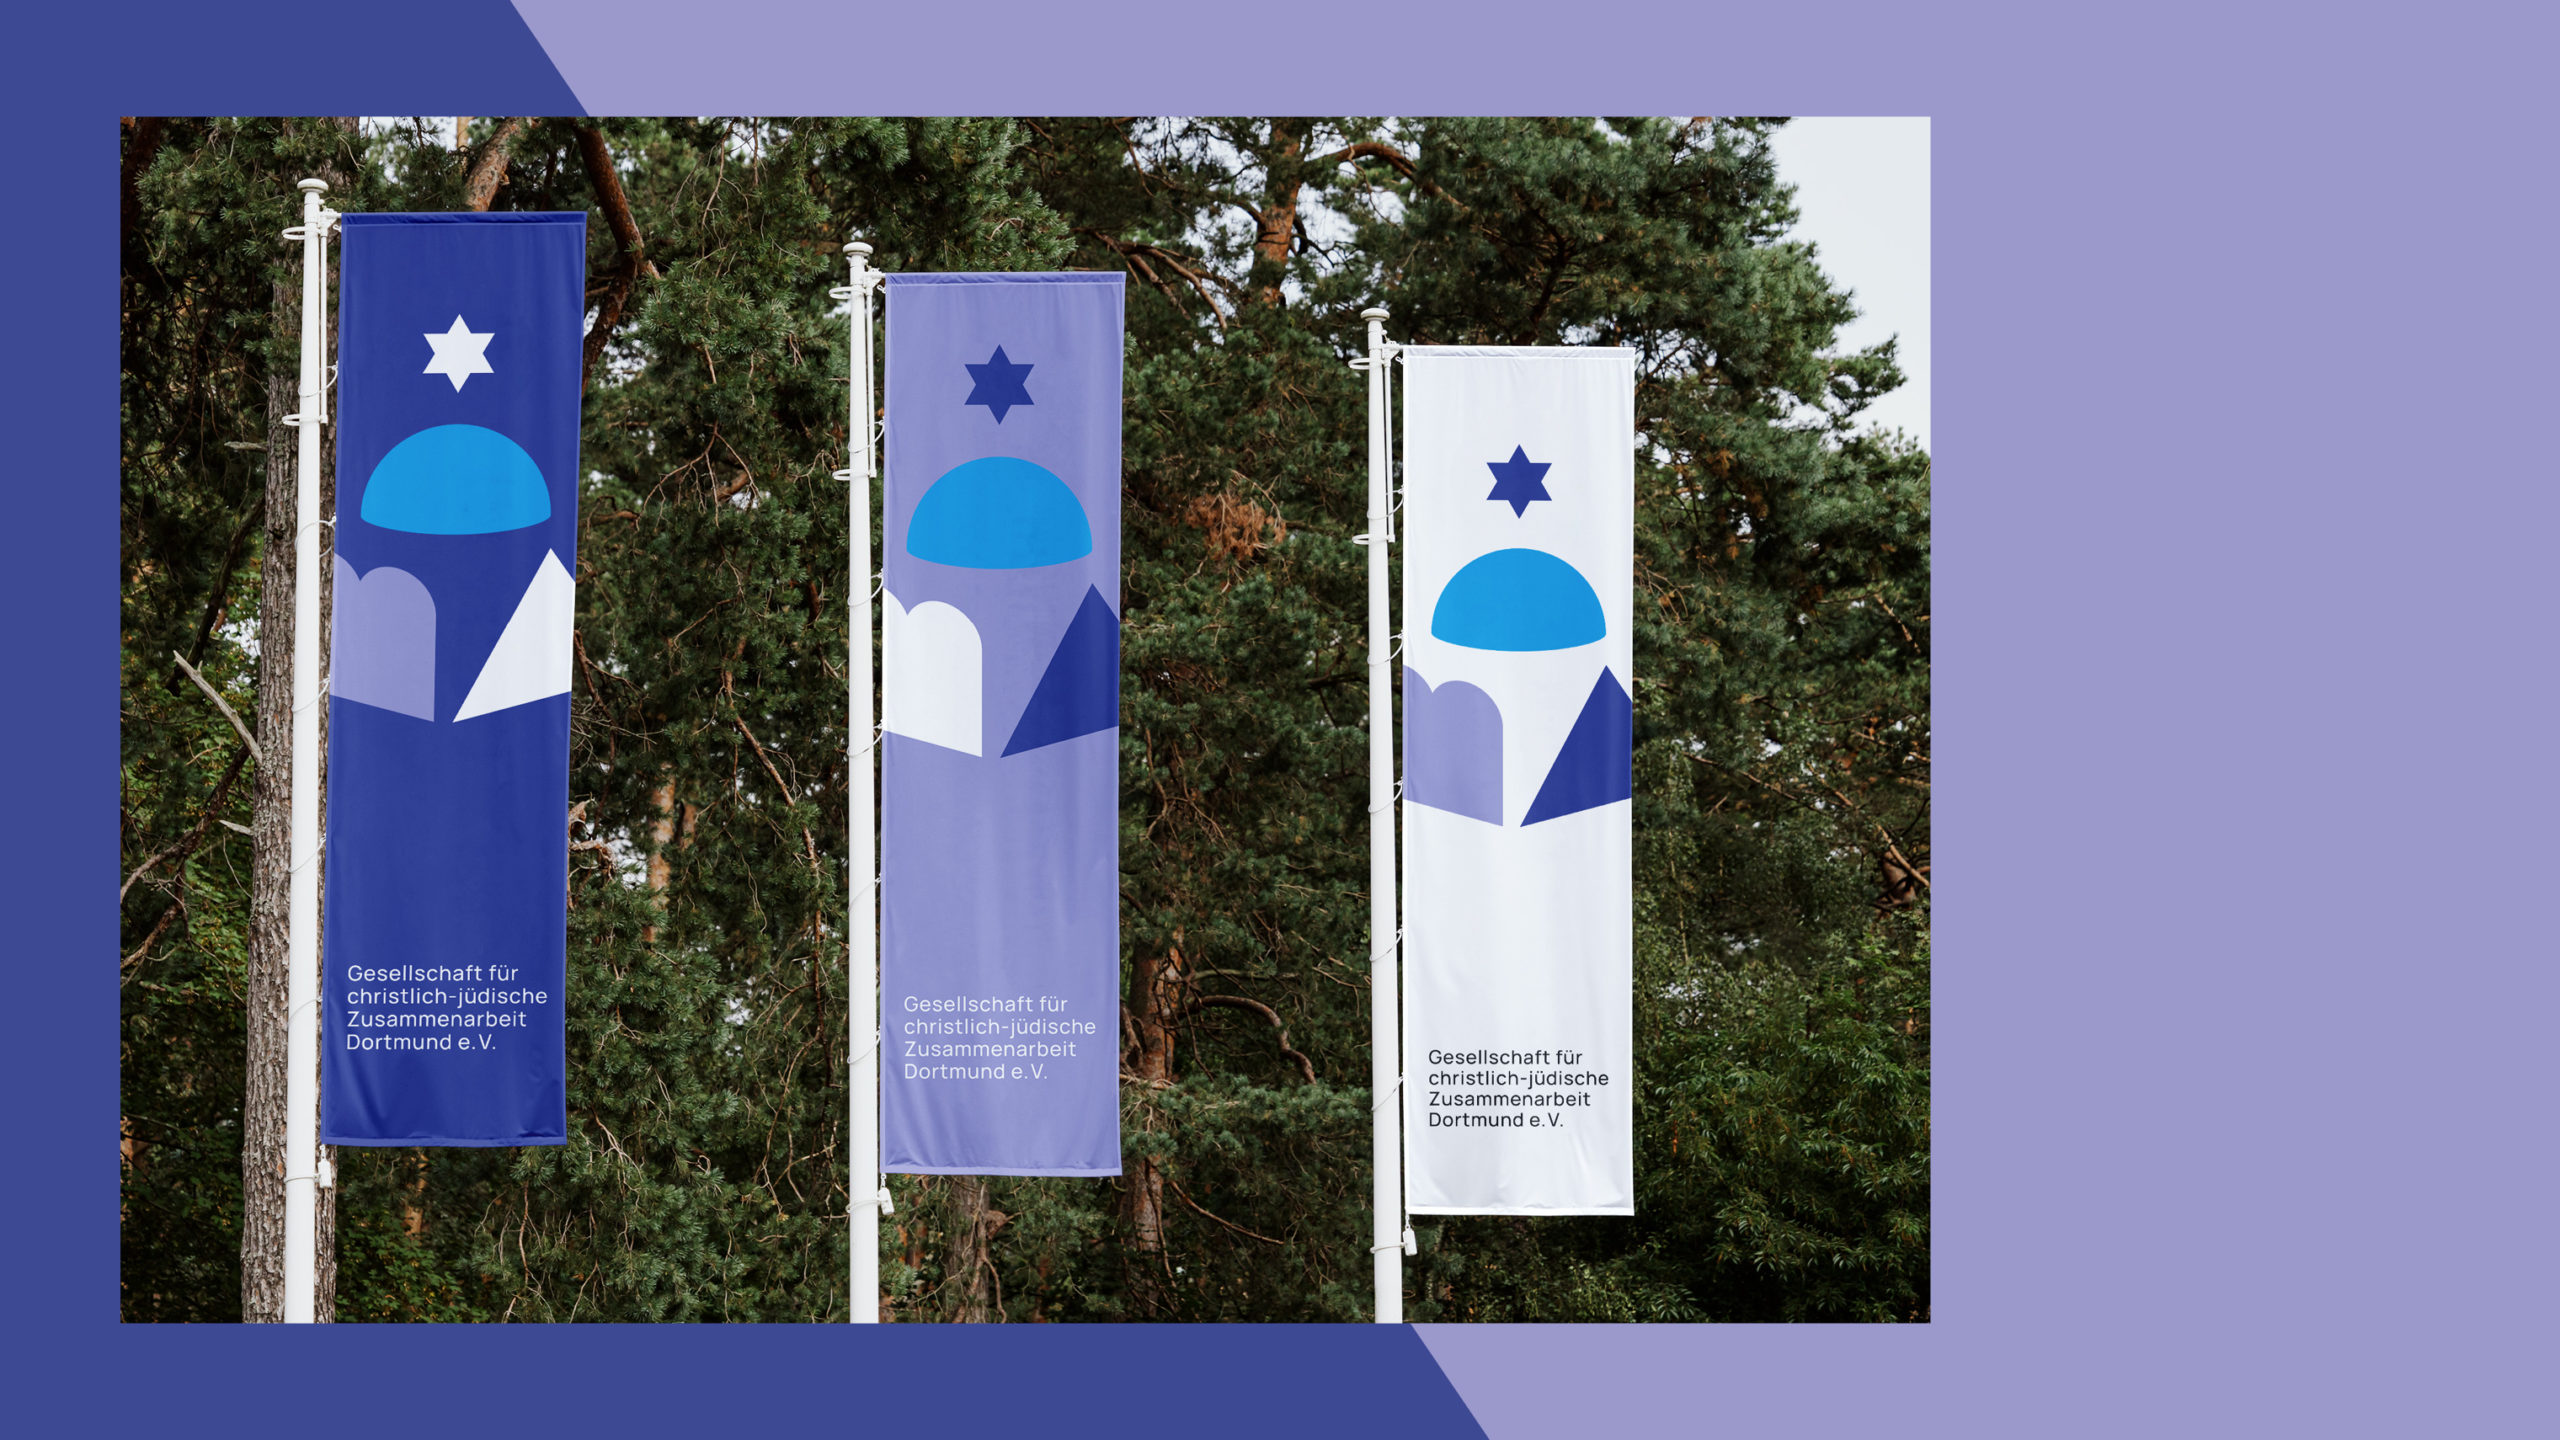 A view of three flags for the Society for Christian-Jewish Cooperation, designed by Florida Brand Design